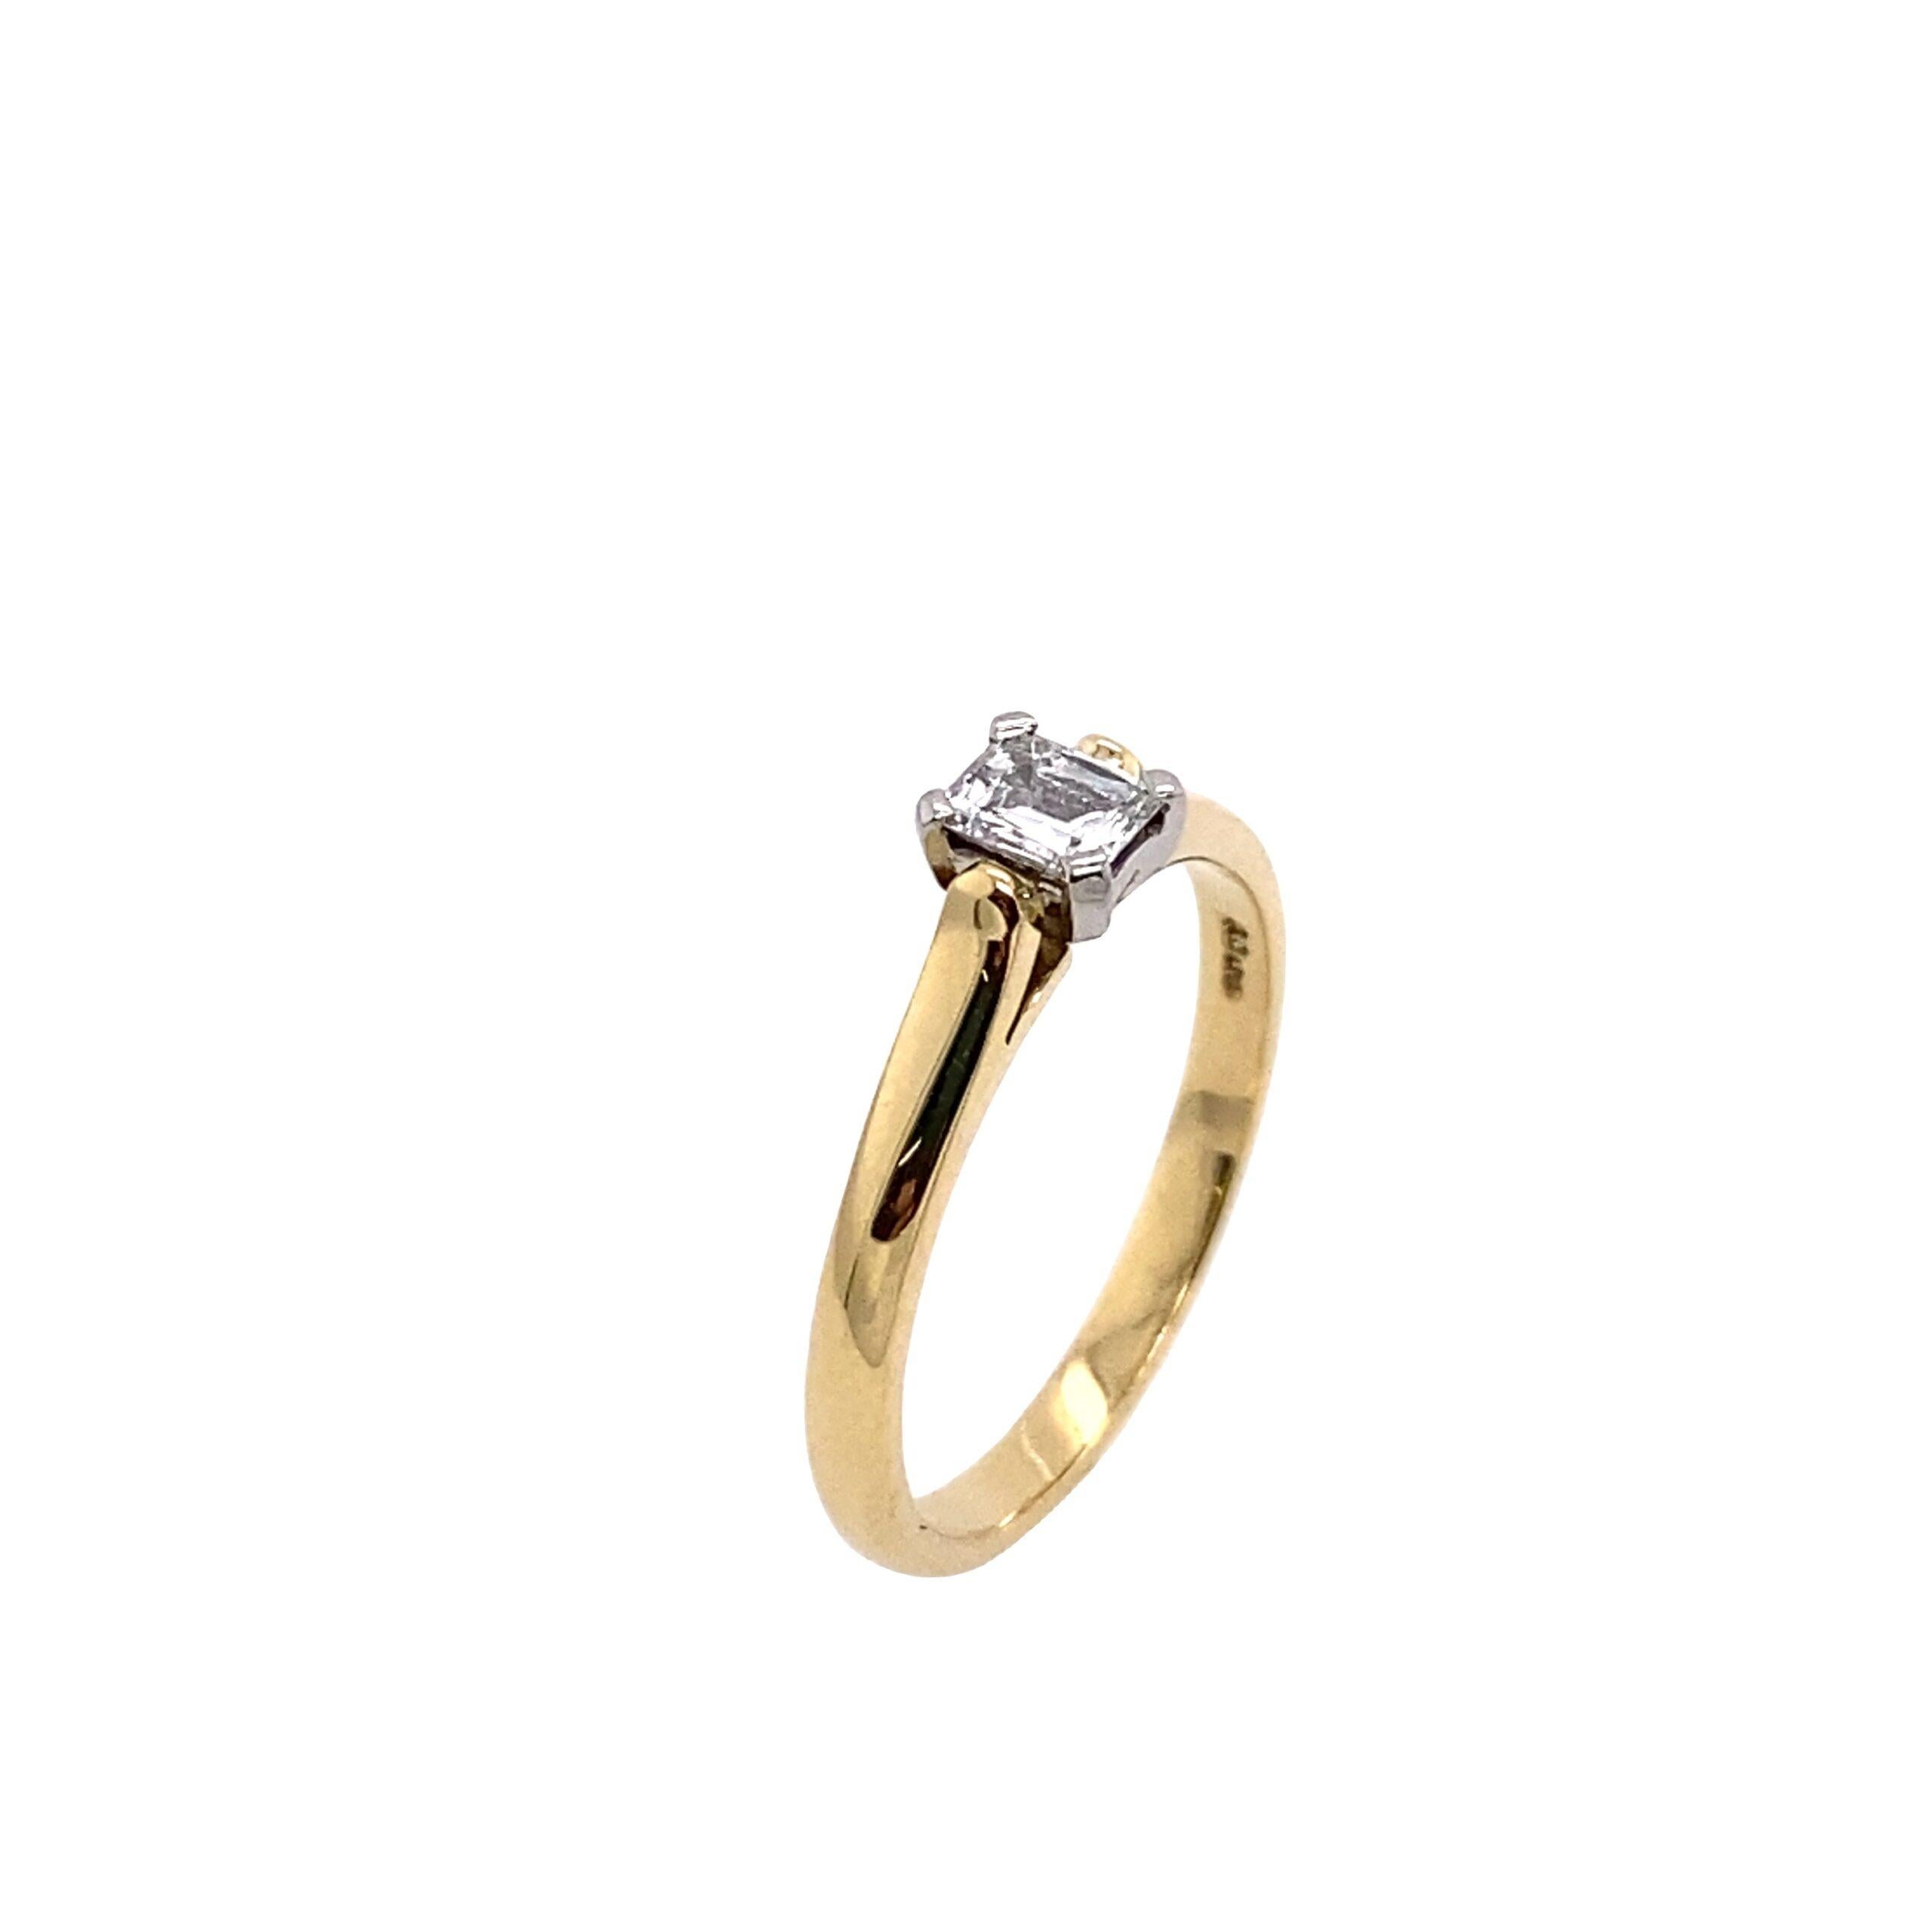 Certified 0.28ct G/VS1 Emerald Shape Criss-Cut , Set In 18ct Yellow Gold

This Certified 0.28ct G/VS1 Emerald Shape Criss-Cut Diamond is set in 18ct Yellow Gold Solitaire Ring with Beaverbrook Certificate. Emerald cut diamonds are very popular, and